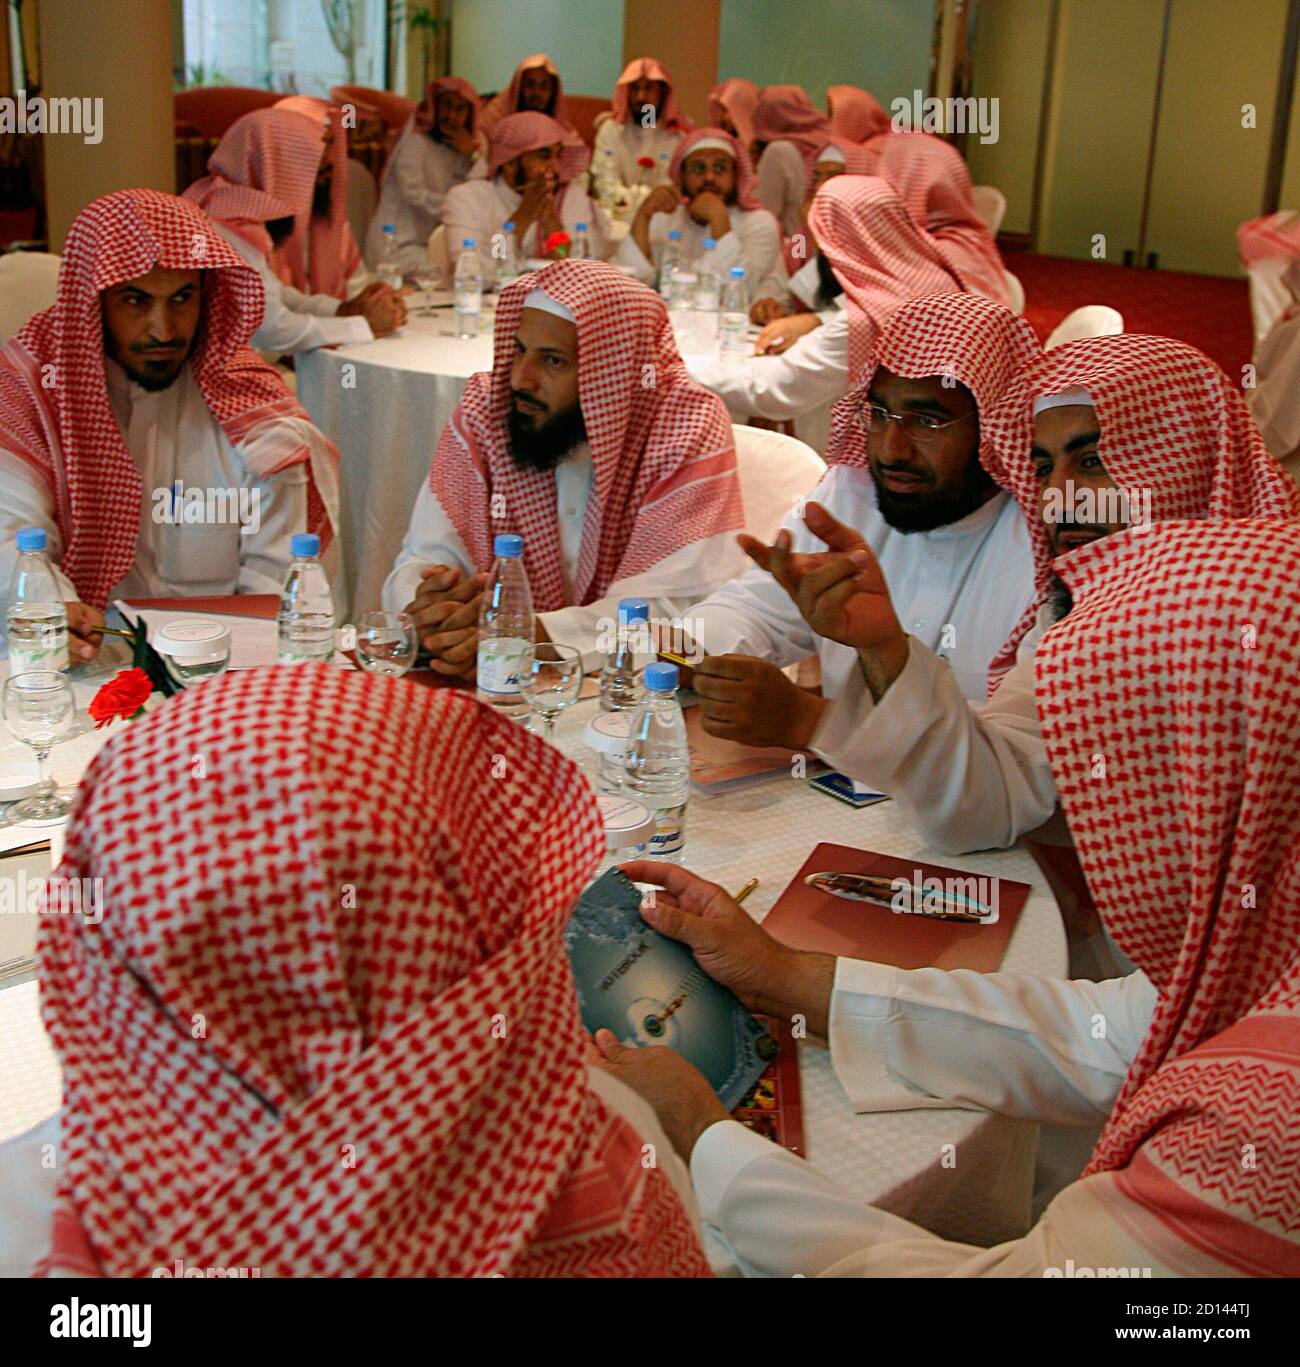 Saudi members of the Committee for the Promotion of Virtue and Prevention of Vice, or religious police, attend a training course in Riyadh September 1, 2007.  REUTERS/Ali Jarekji  (SAUDI ARABIA) Foto Stock